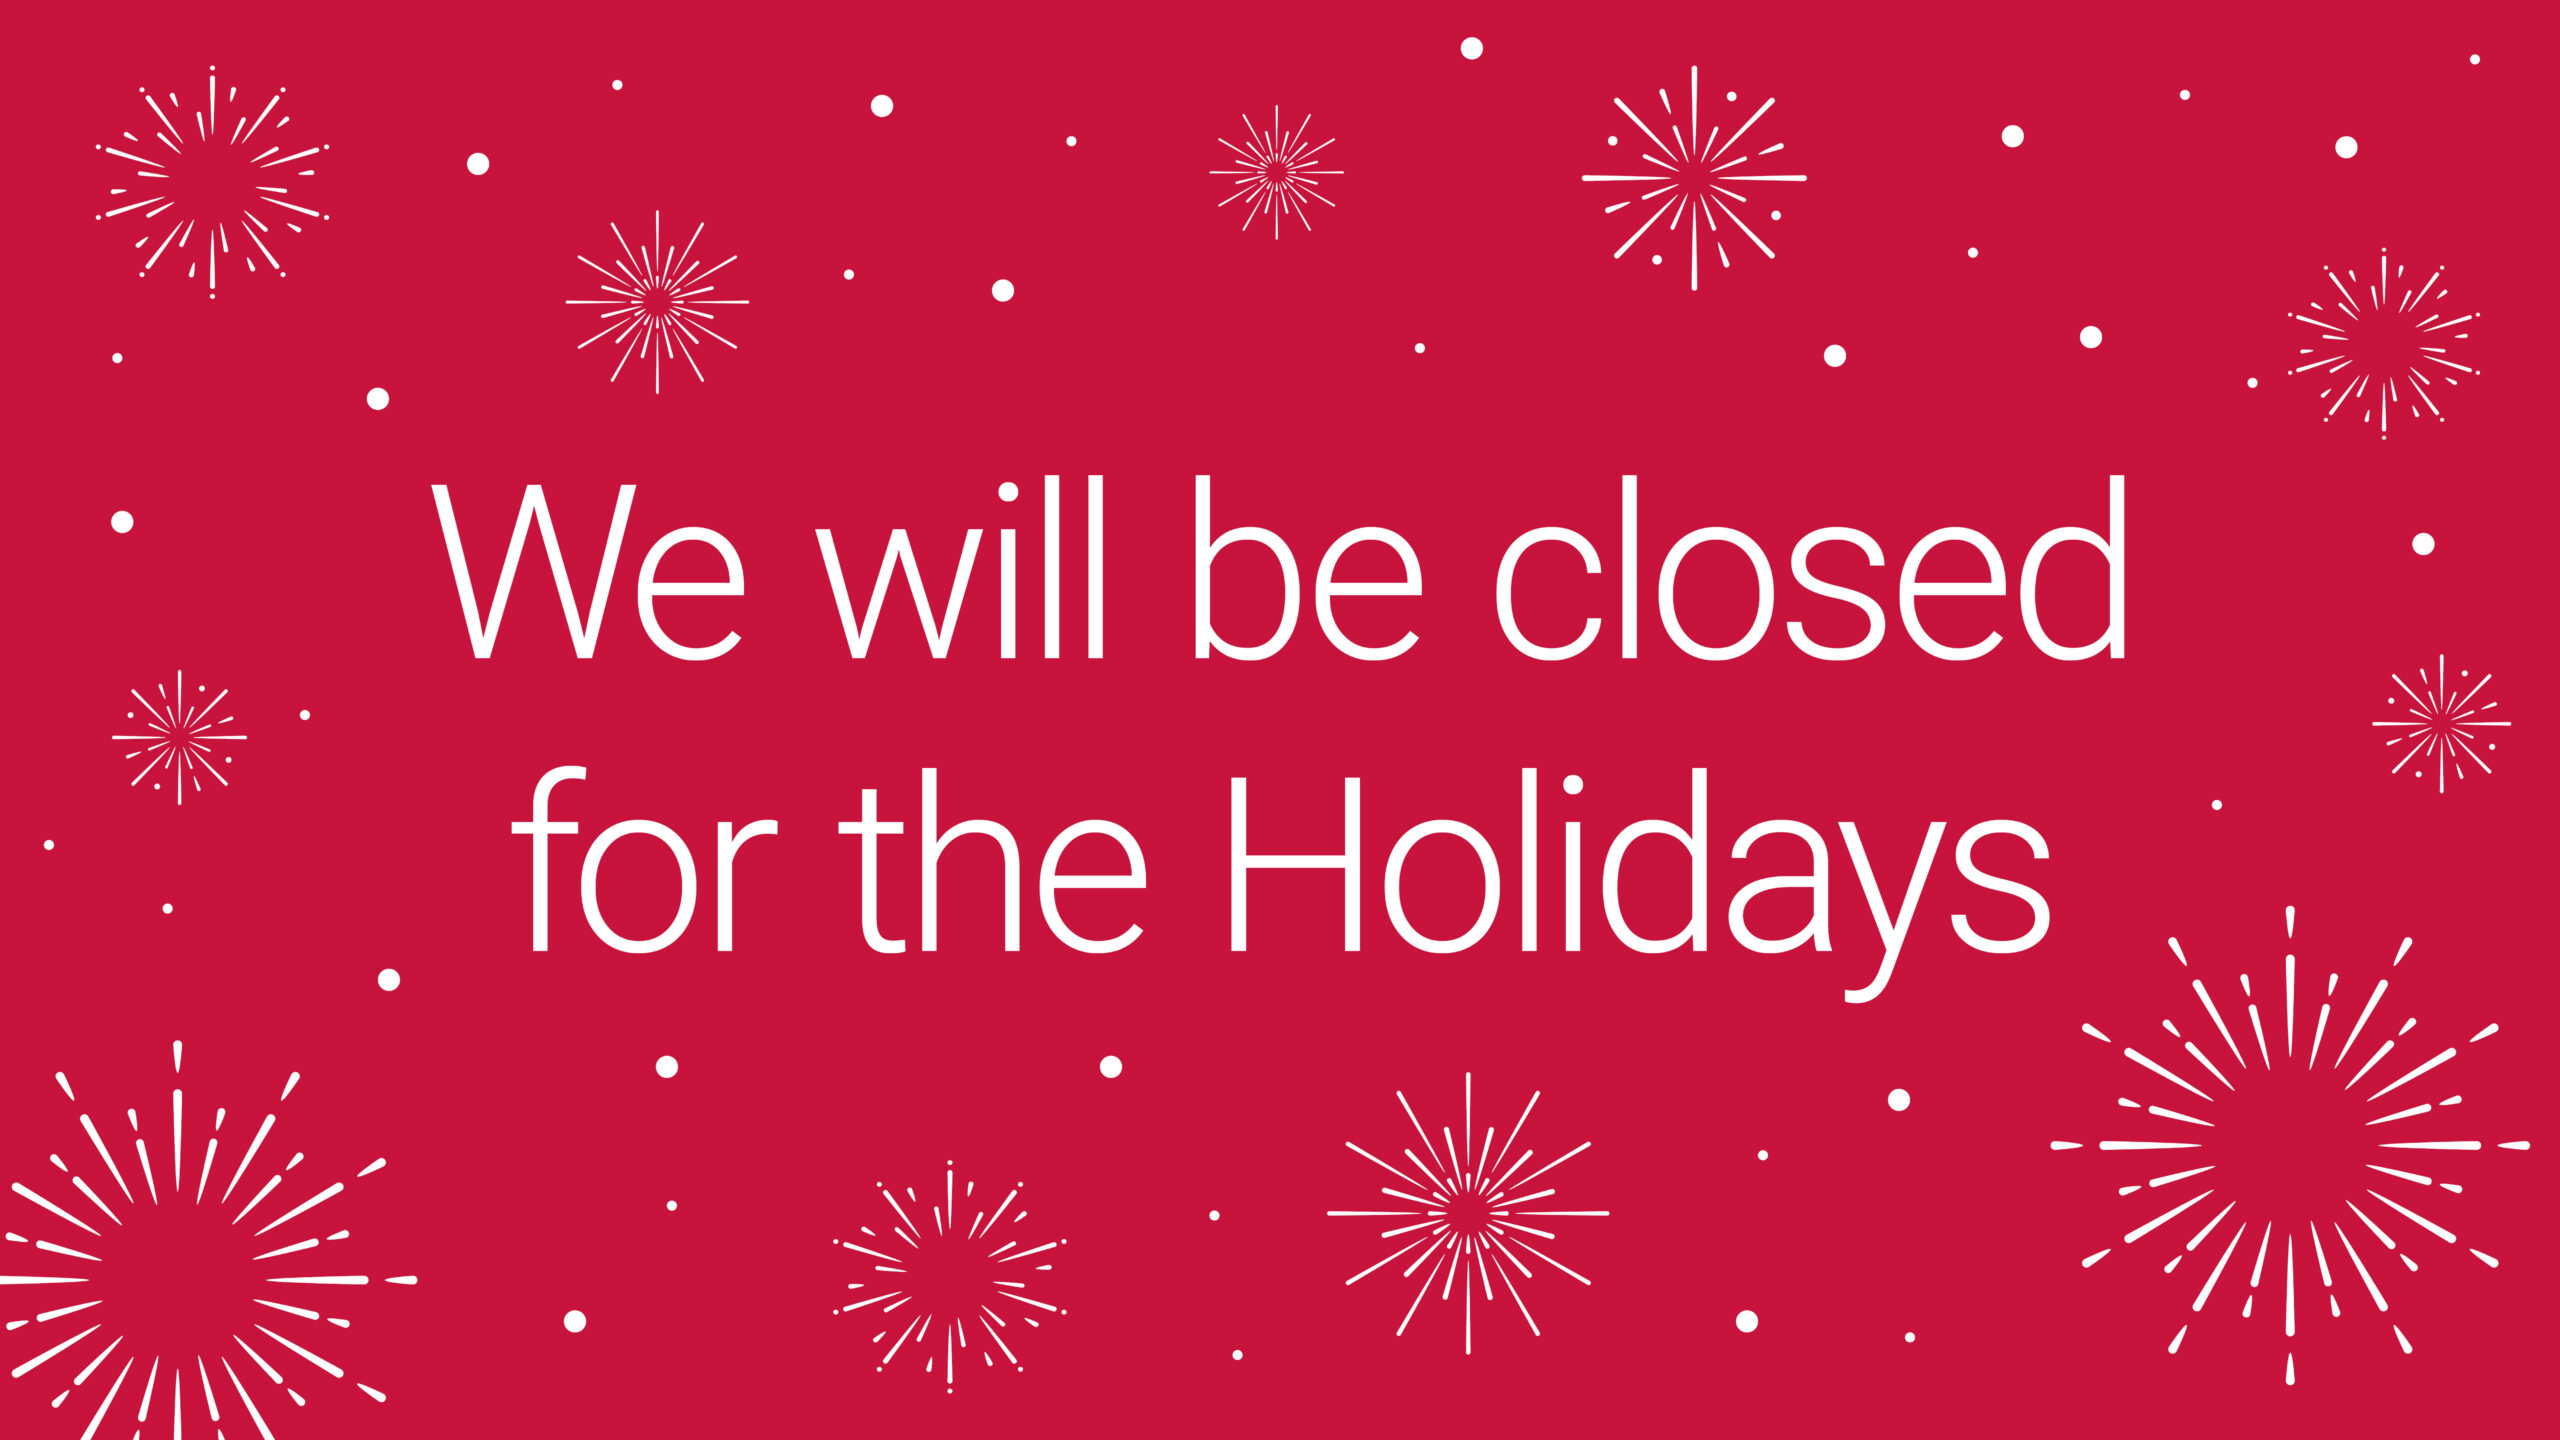 Offices closed for holidays and contact details of on-call team